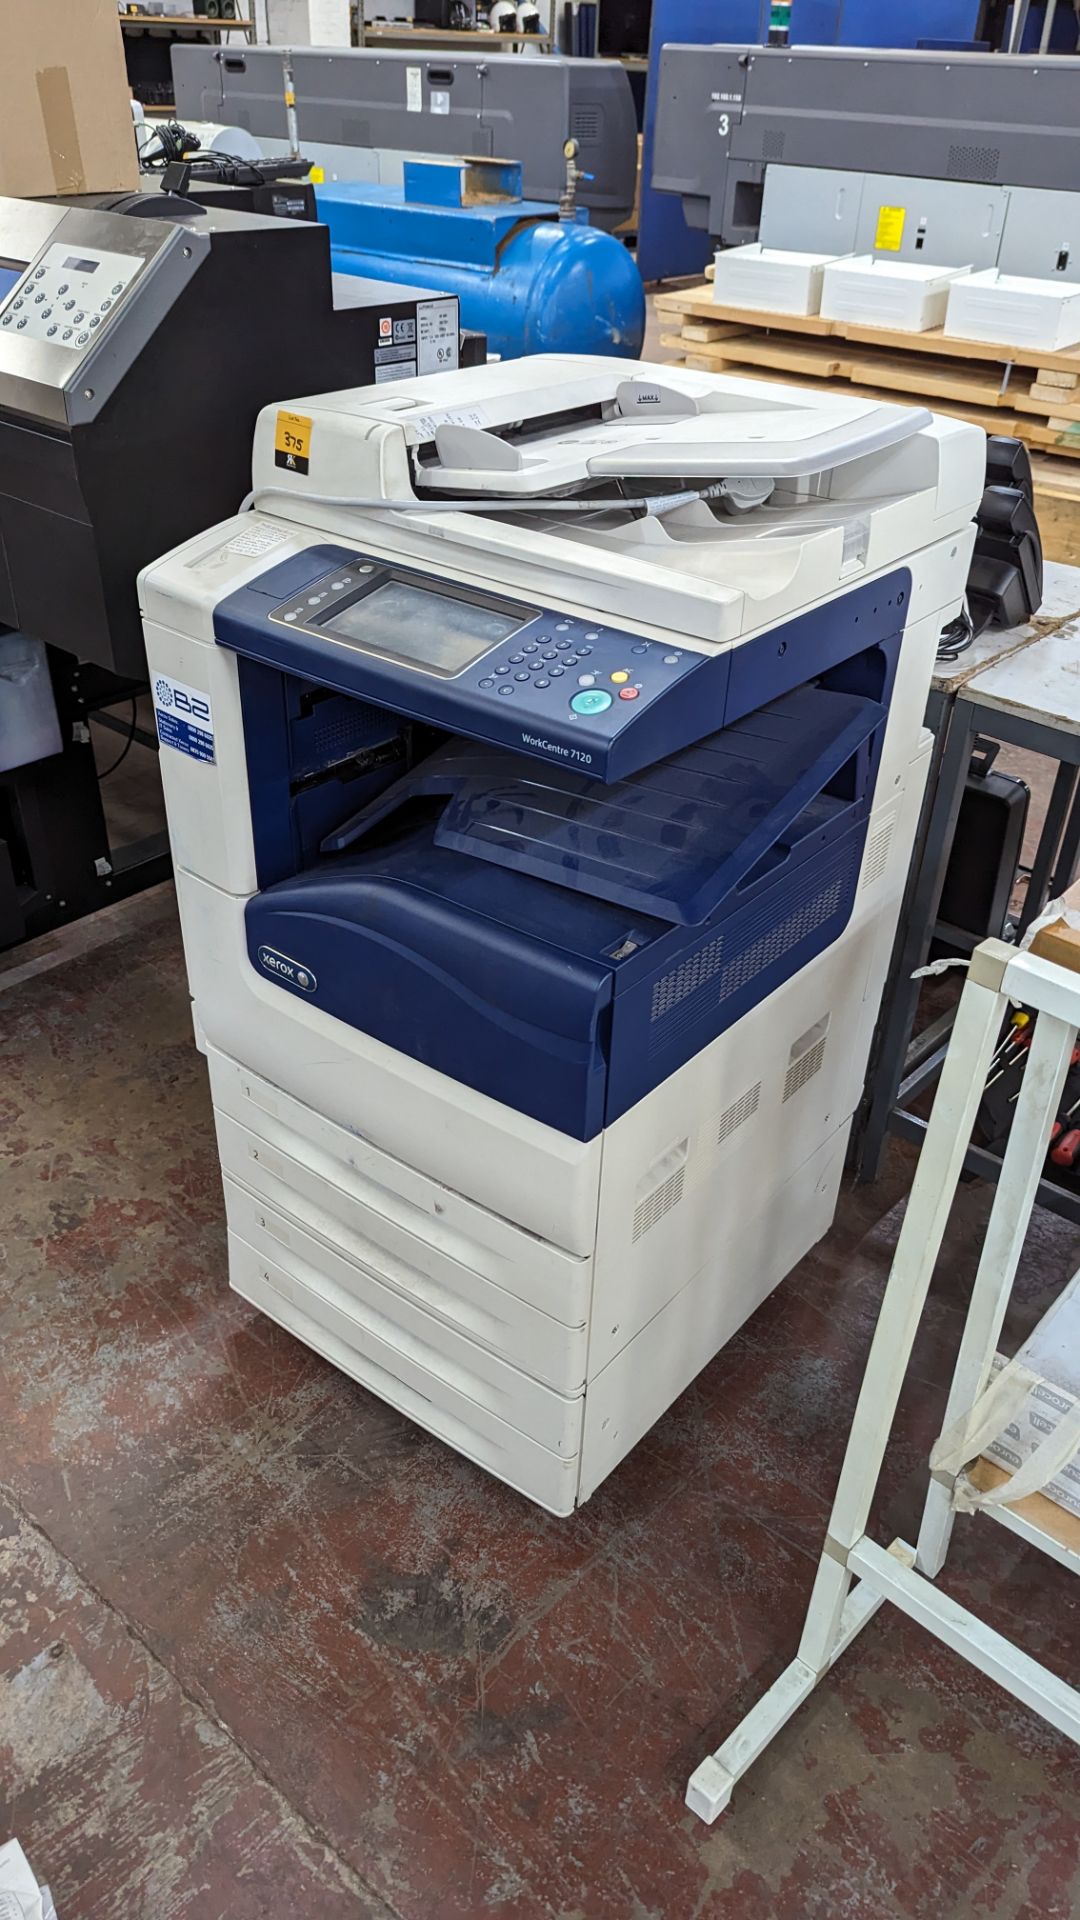 Xerox WorkCentre 7120 floor standing multifunction copier with 4 paper cassettes, auto document feed